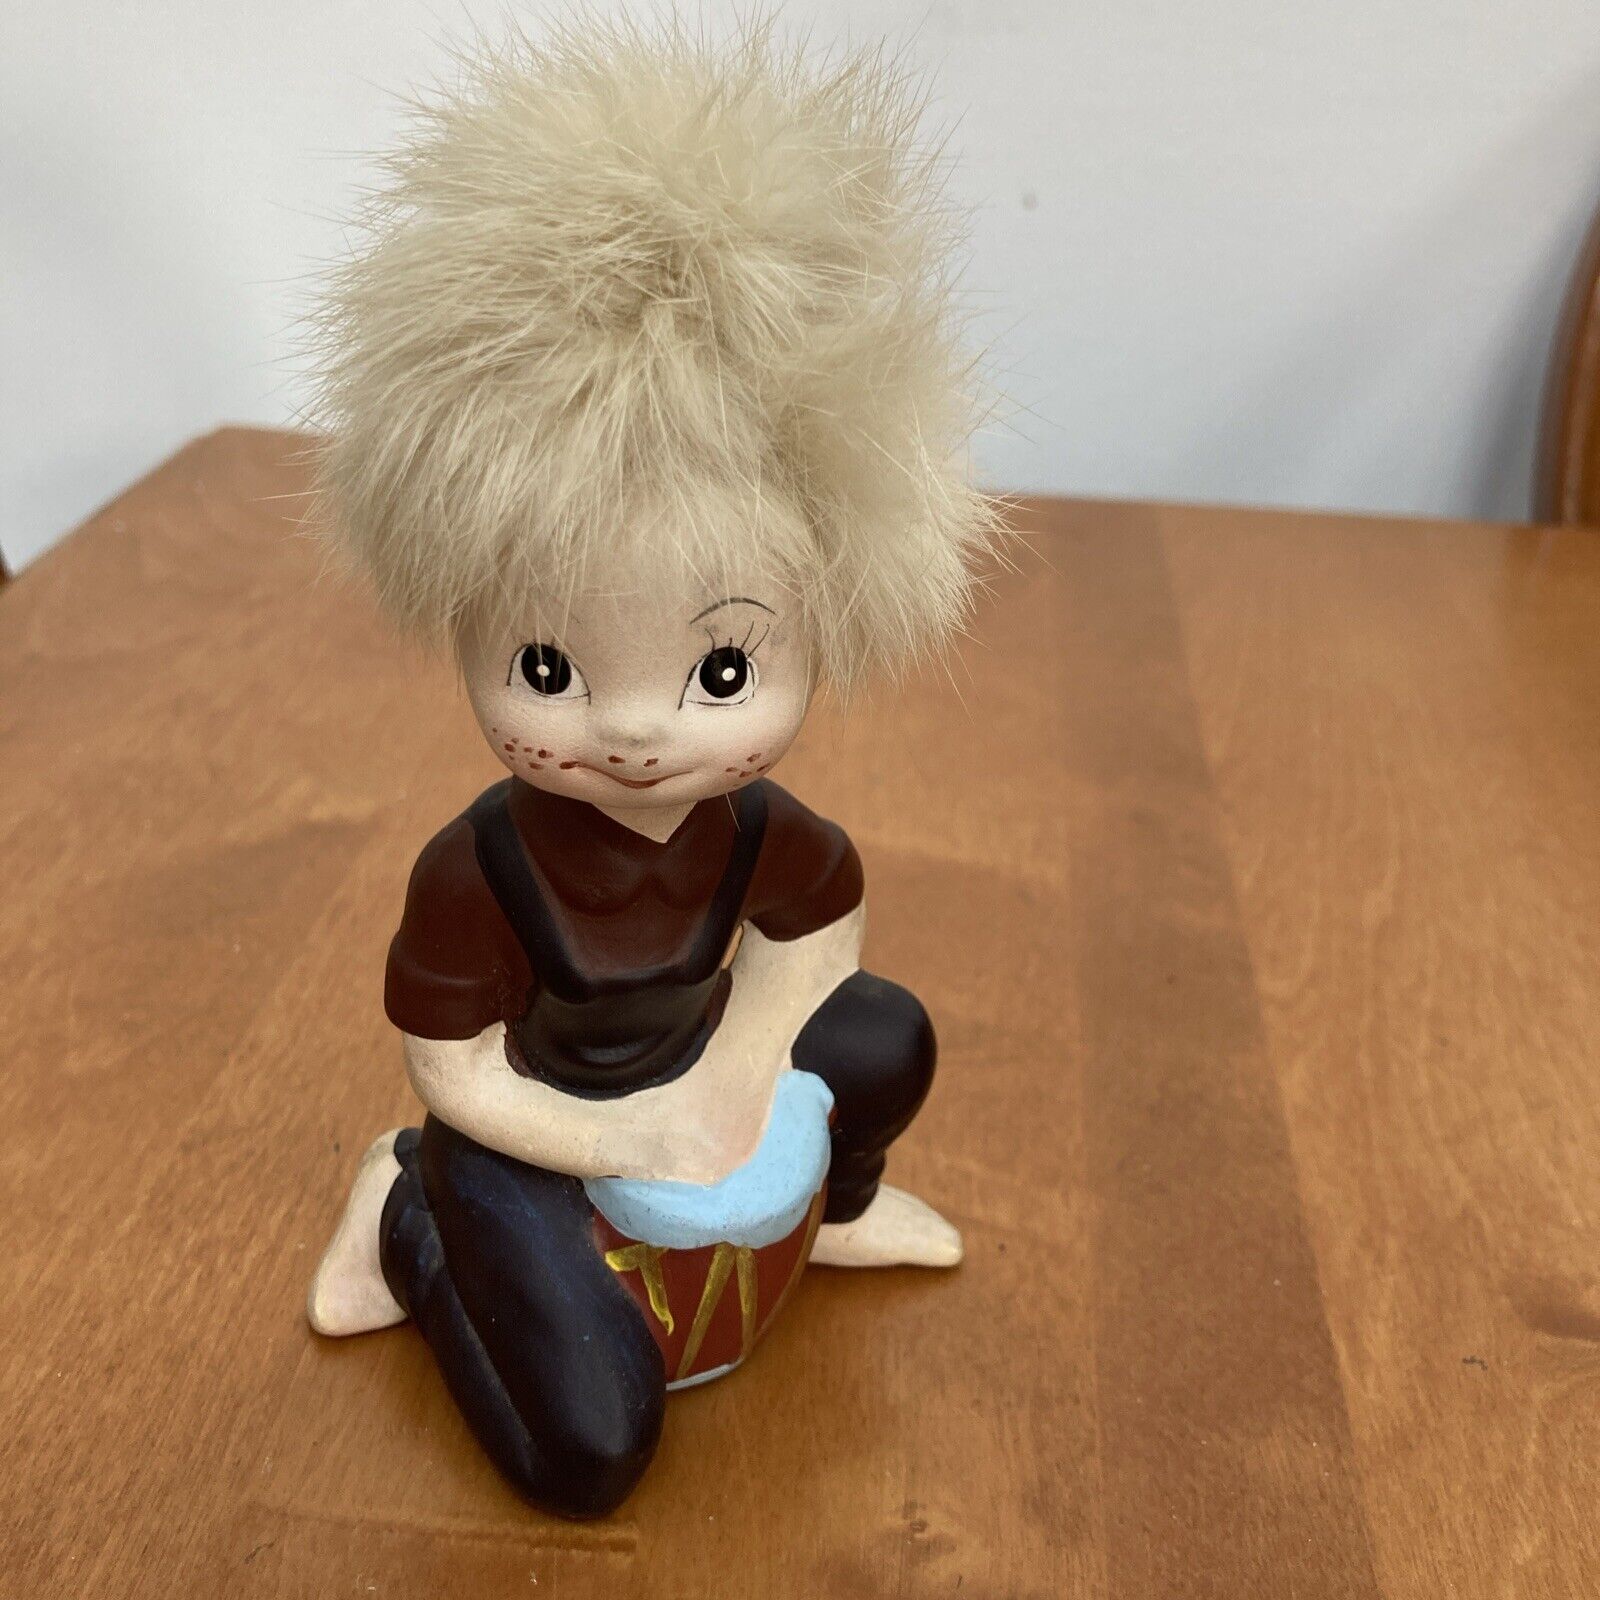 Vintage Adorable Boy W/ Fuzzy Hair And Drum Inarco Figurine 1964 5” Tall